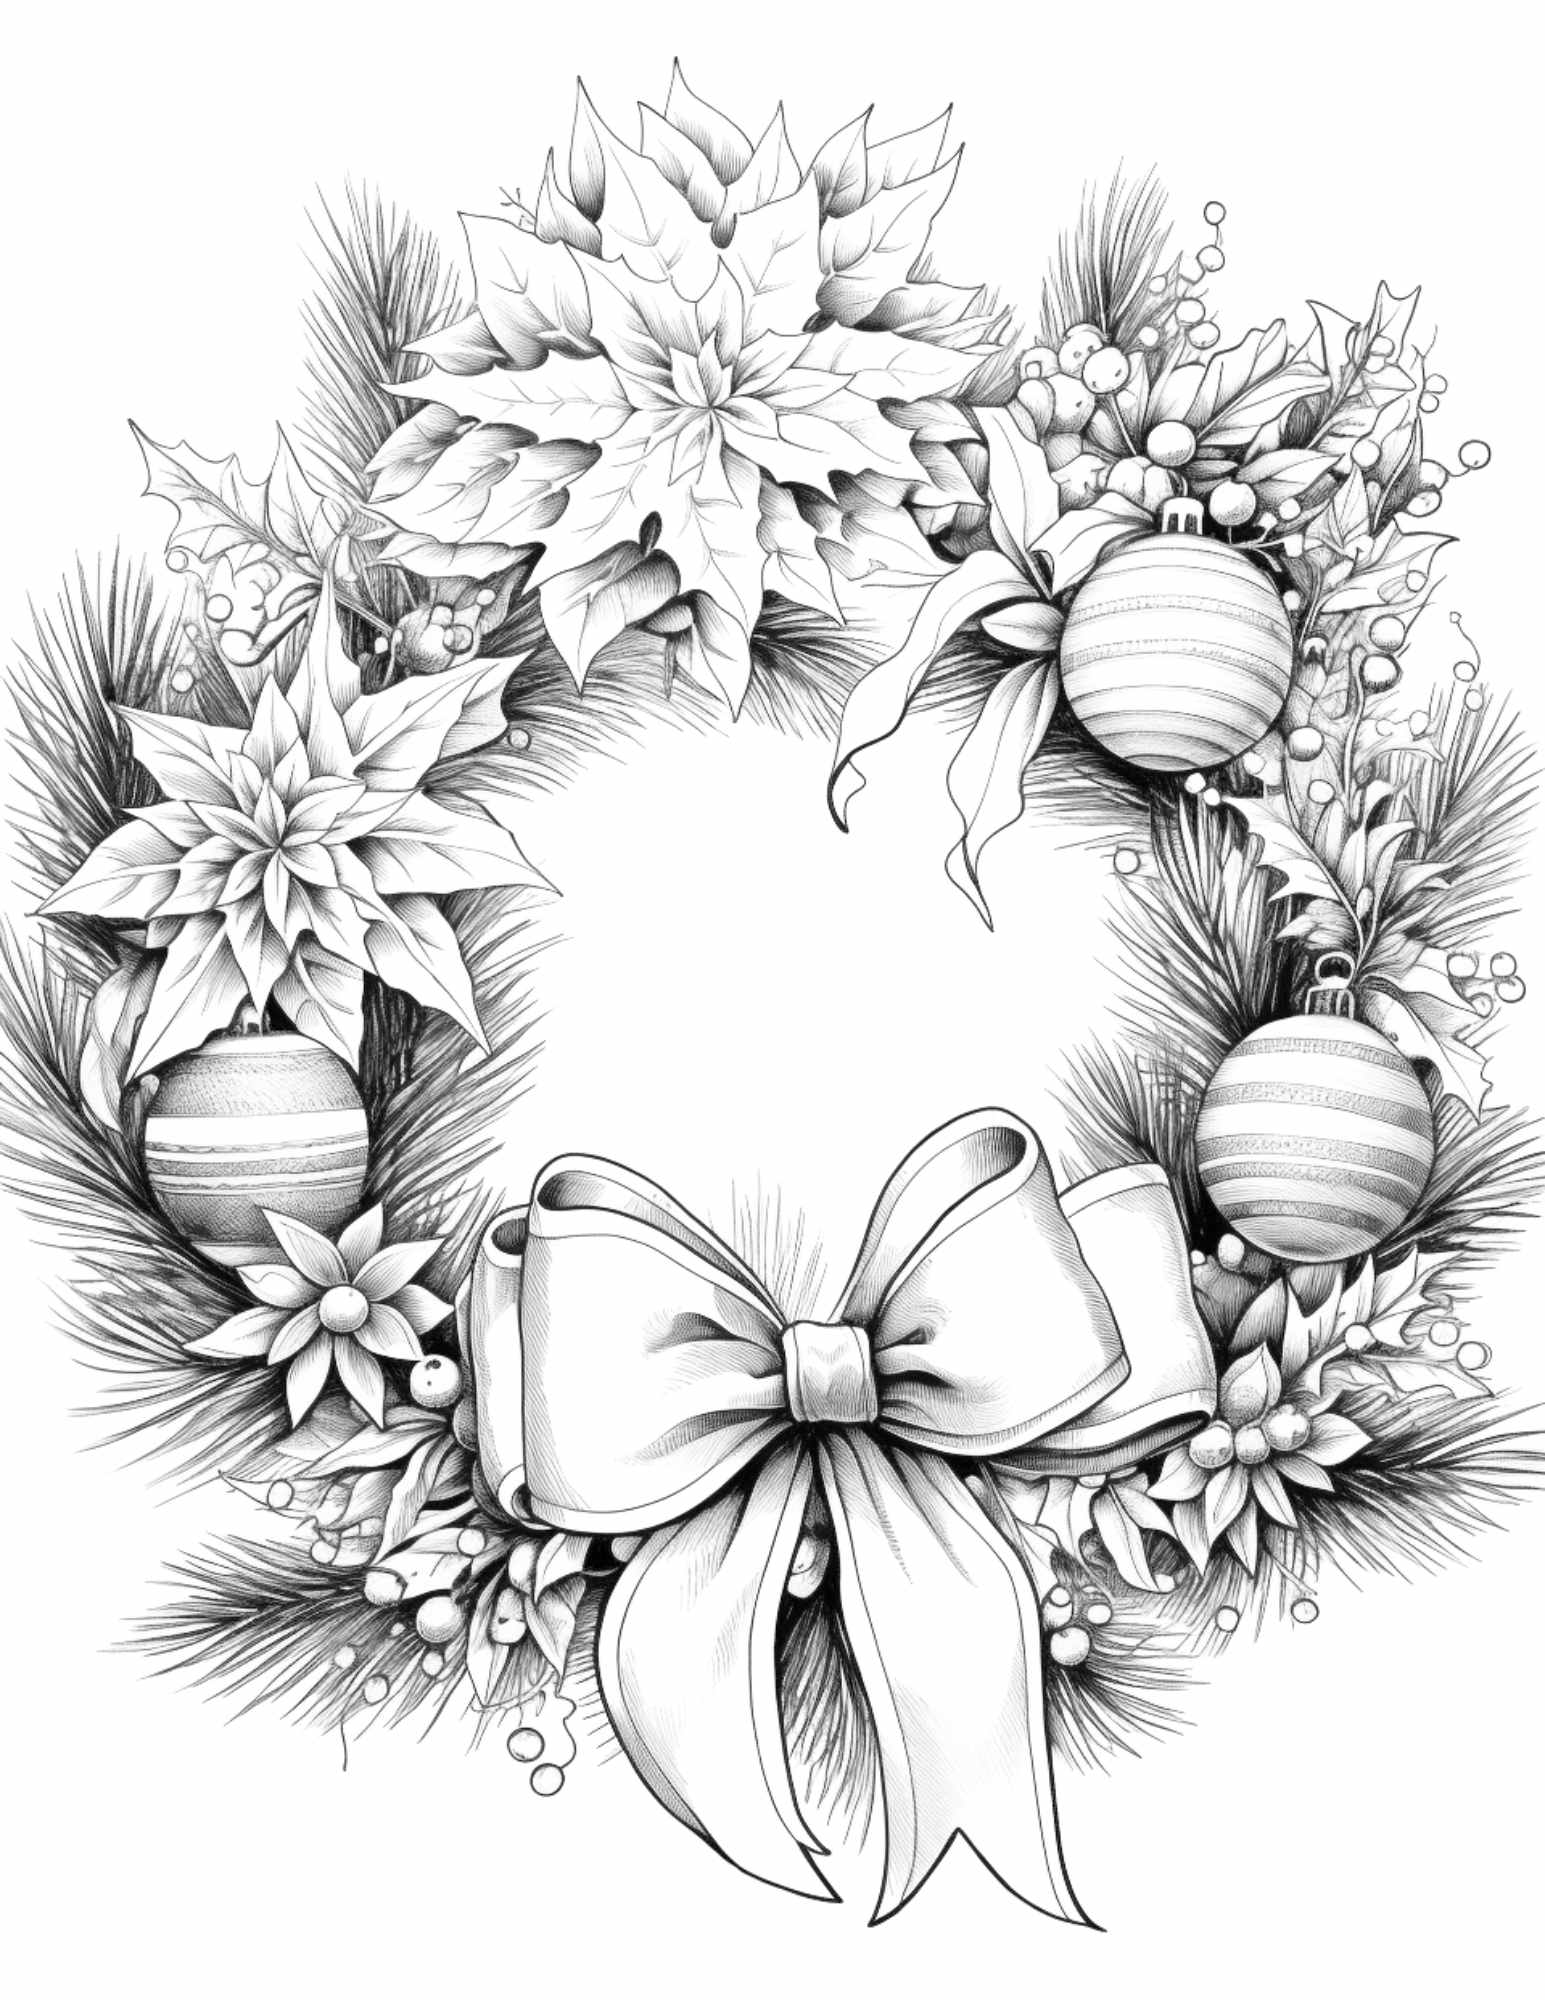 adult coloring pages, adults coloring sheets, adult coloring book printable, free coloring pages, free adult coloring pages, christmas coloring pages for adults, christmas coloring sheets, free christmas coloring pages, holiday coloring pages for adults